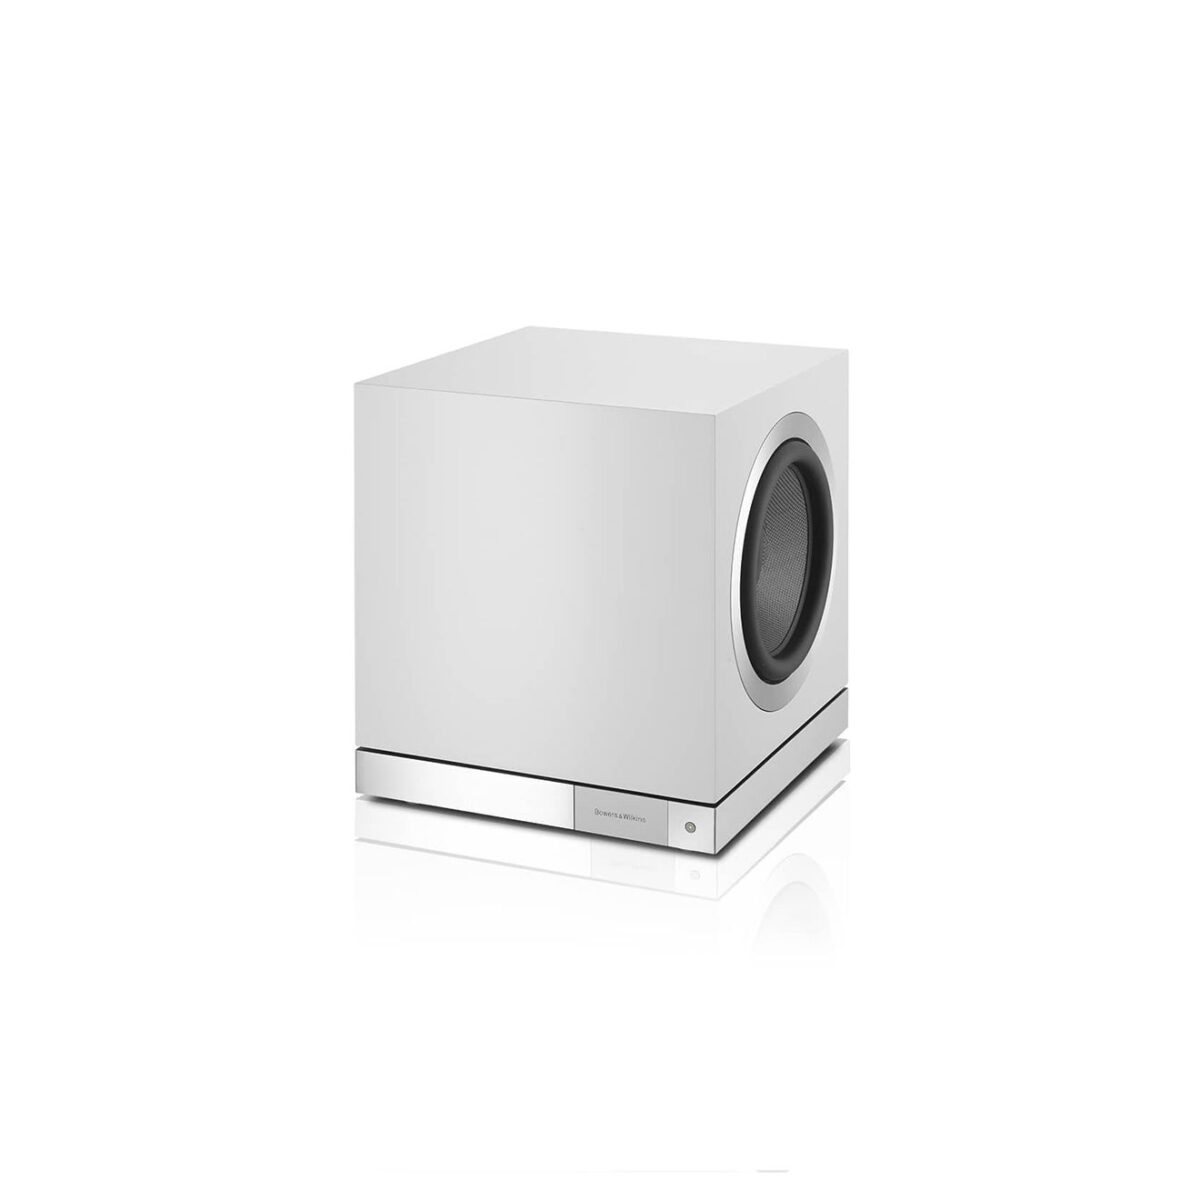 Bowers & Wilkins Subwoofer DB2